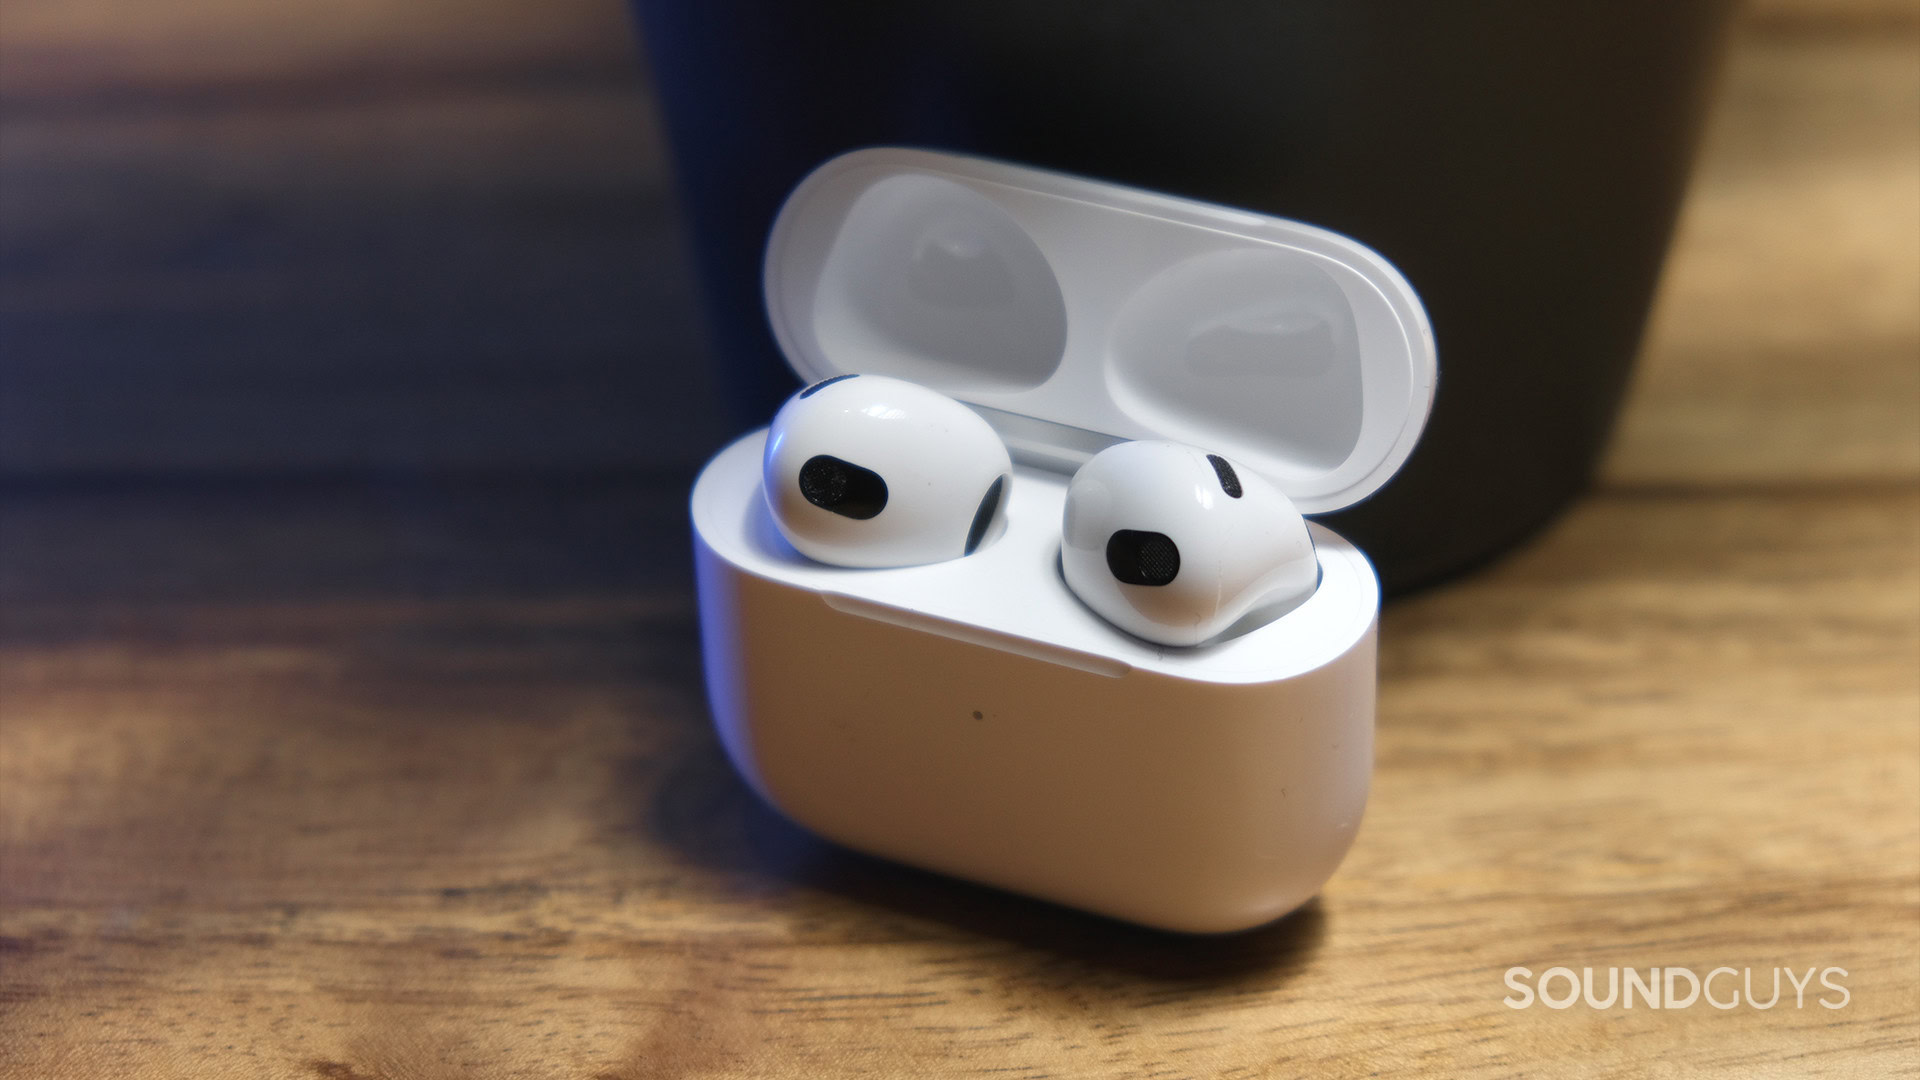 Yes, the AirPods 2 are still worth buying, even though the AirPods